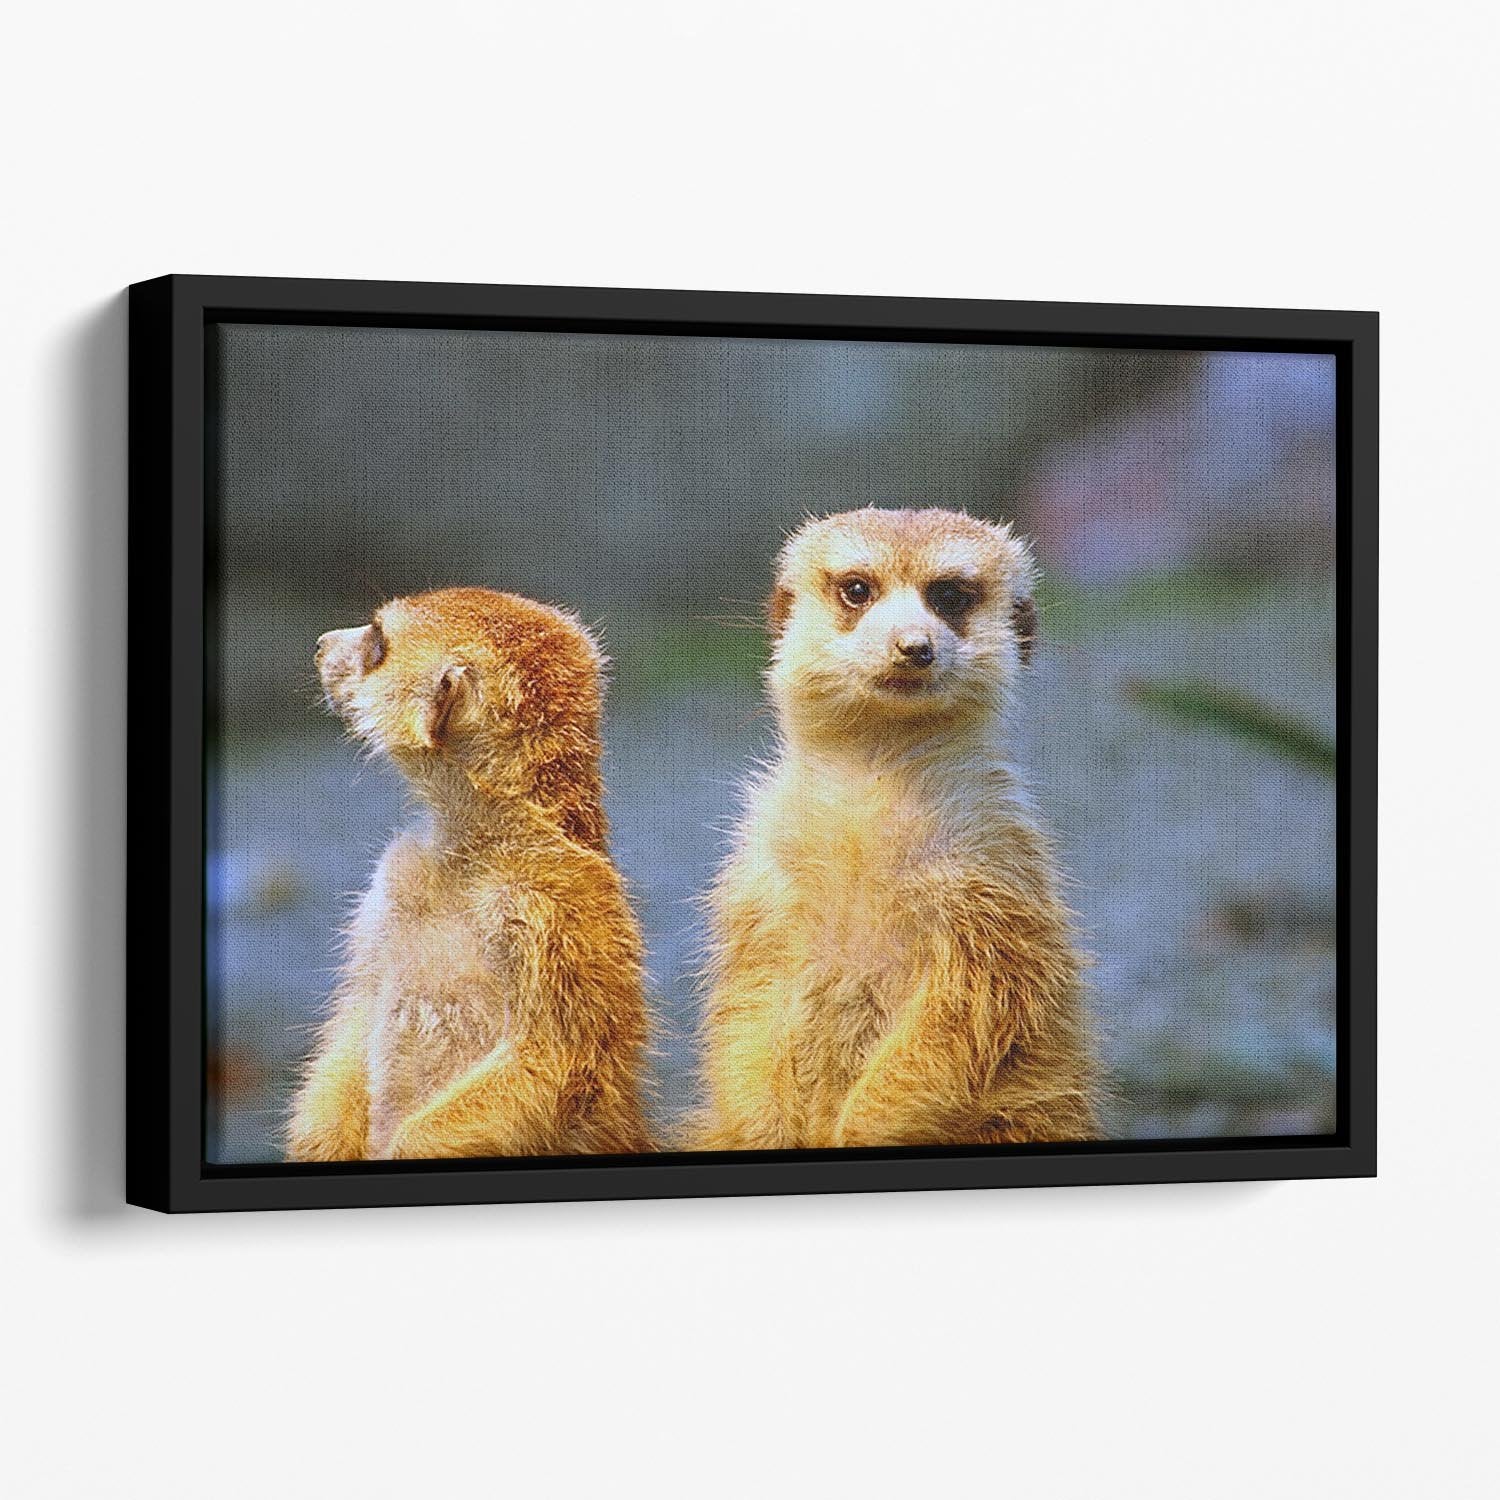 Two meerkats watching over their family in zoo Floating Framed Canvas - Canvas Art Rocks - 1